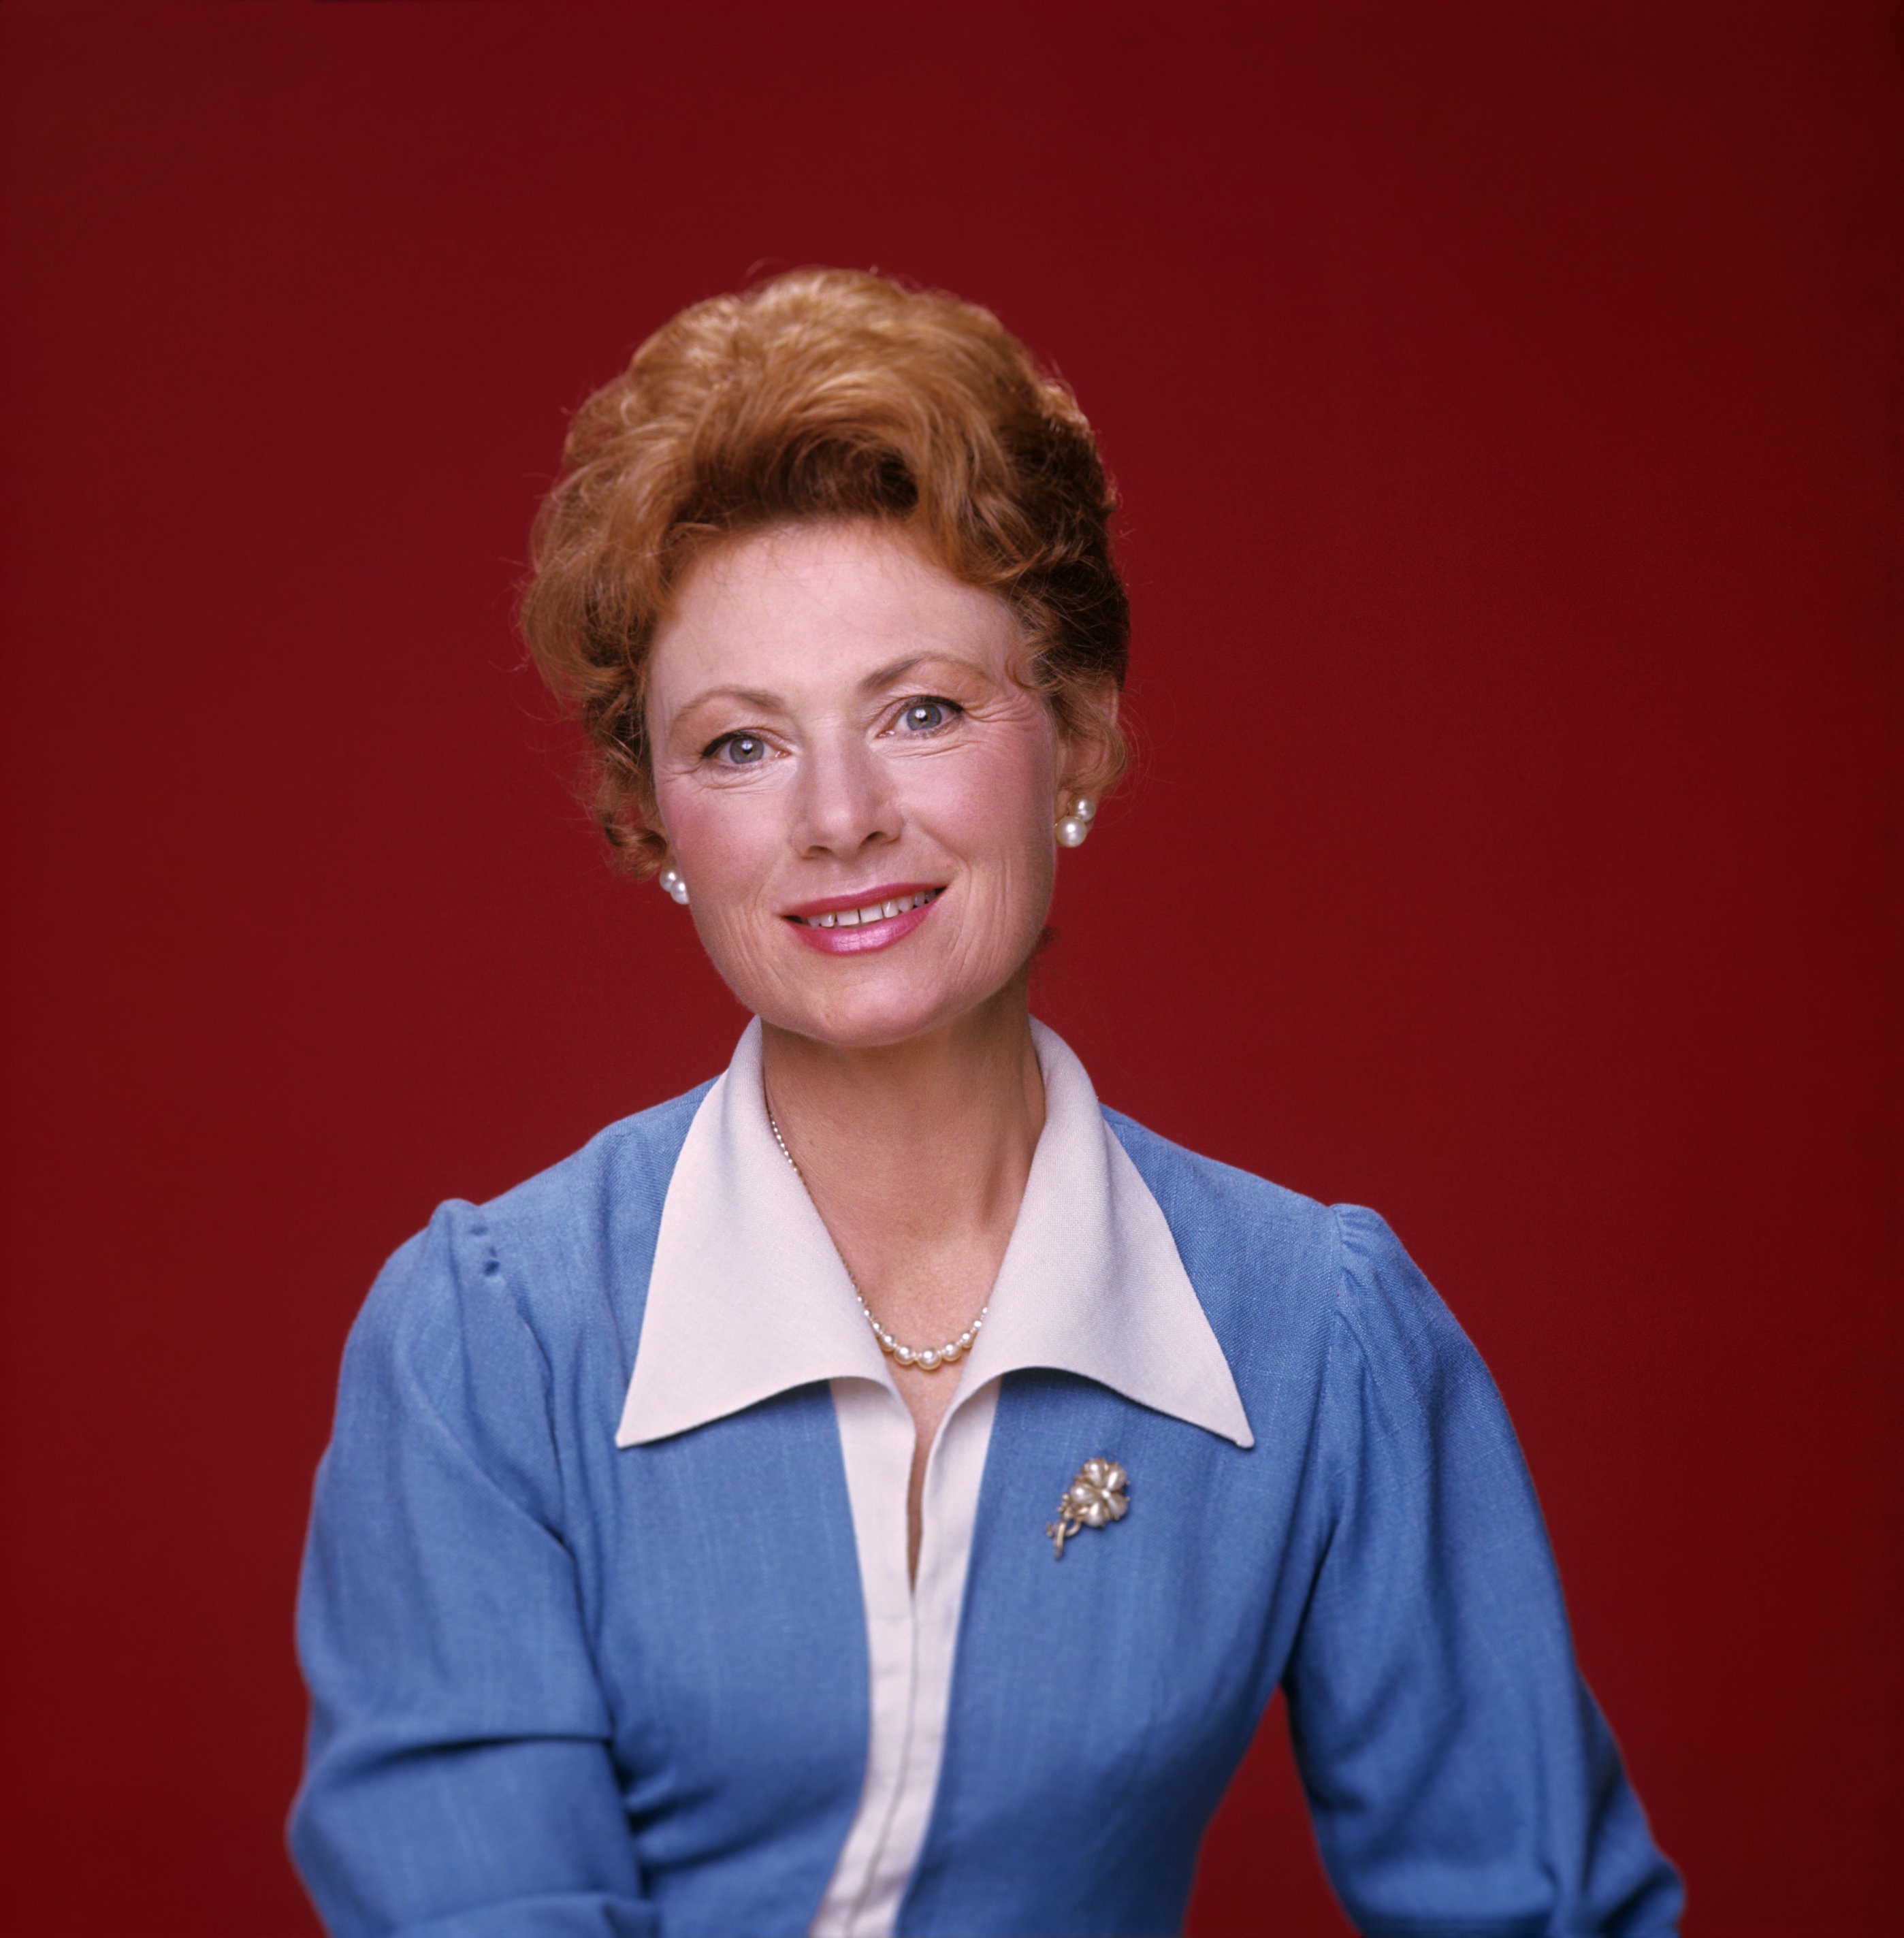 Marion Ross From Happy Days Was Going Through Terrible Life Phase Before Getting Cast On The Show